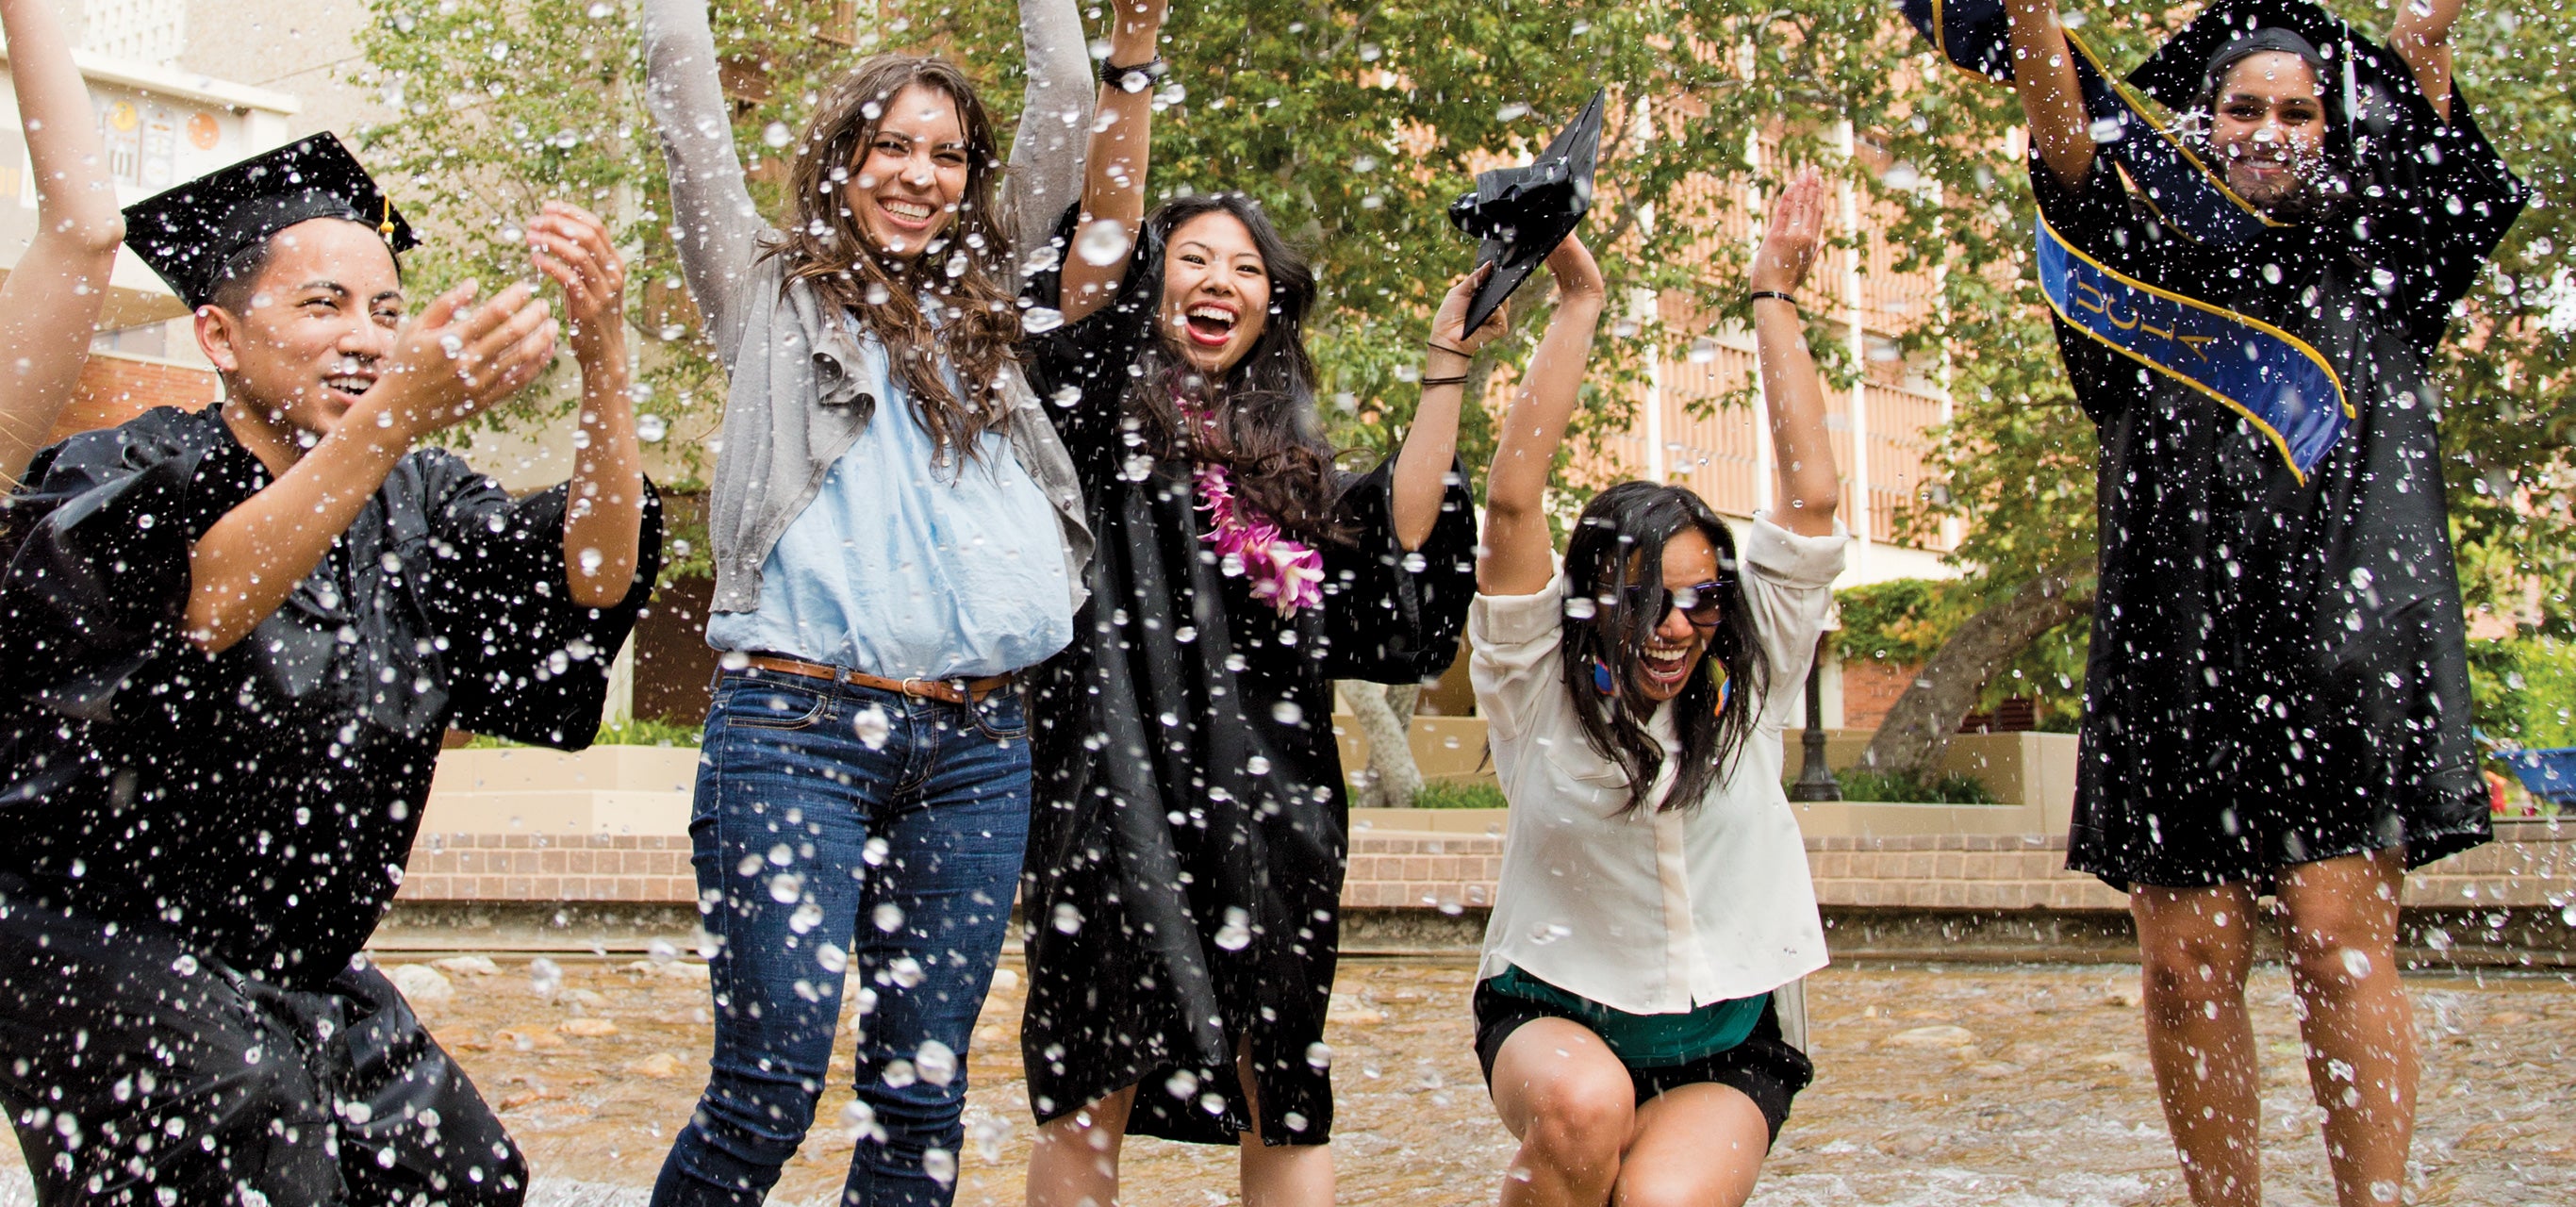 A few graduates celebrate their accomplishments by jumping in a fountain.